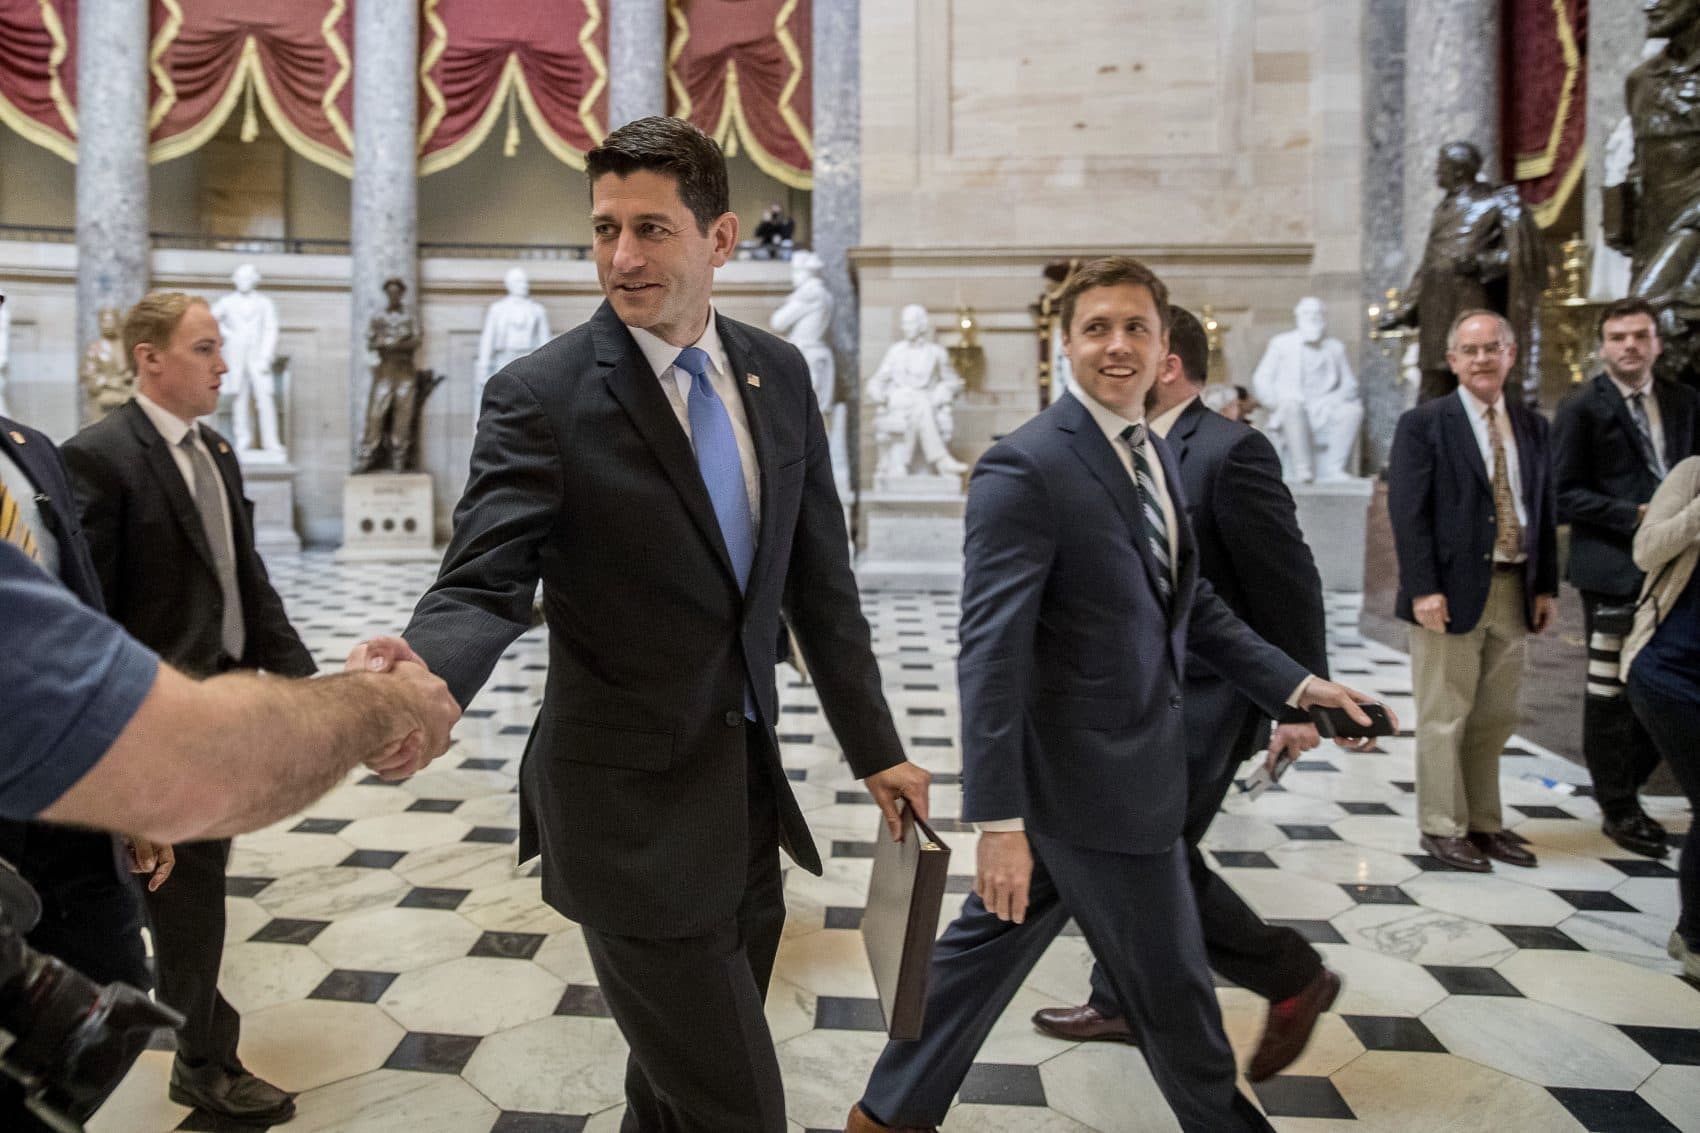 By weaponizing our medical records, the bill creates the foundation for public health crises in America, writes Miles Howard. Pictured: House Speaker Paul Ryan of Wis. greets guests as he walks to the House Chamber on Capitol Hill in Washington, Thursday, before the vote on the health care bill. (Andrew Harnik/AP)